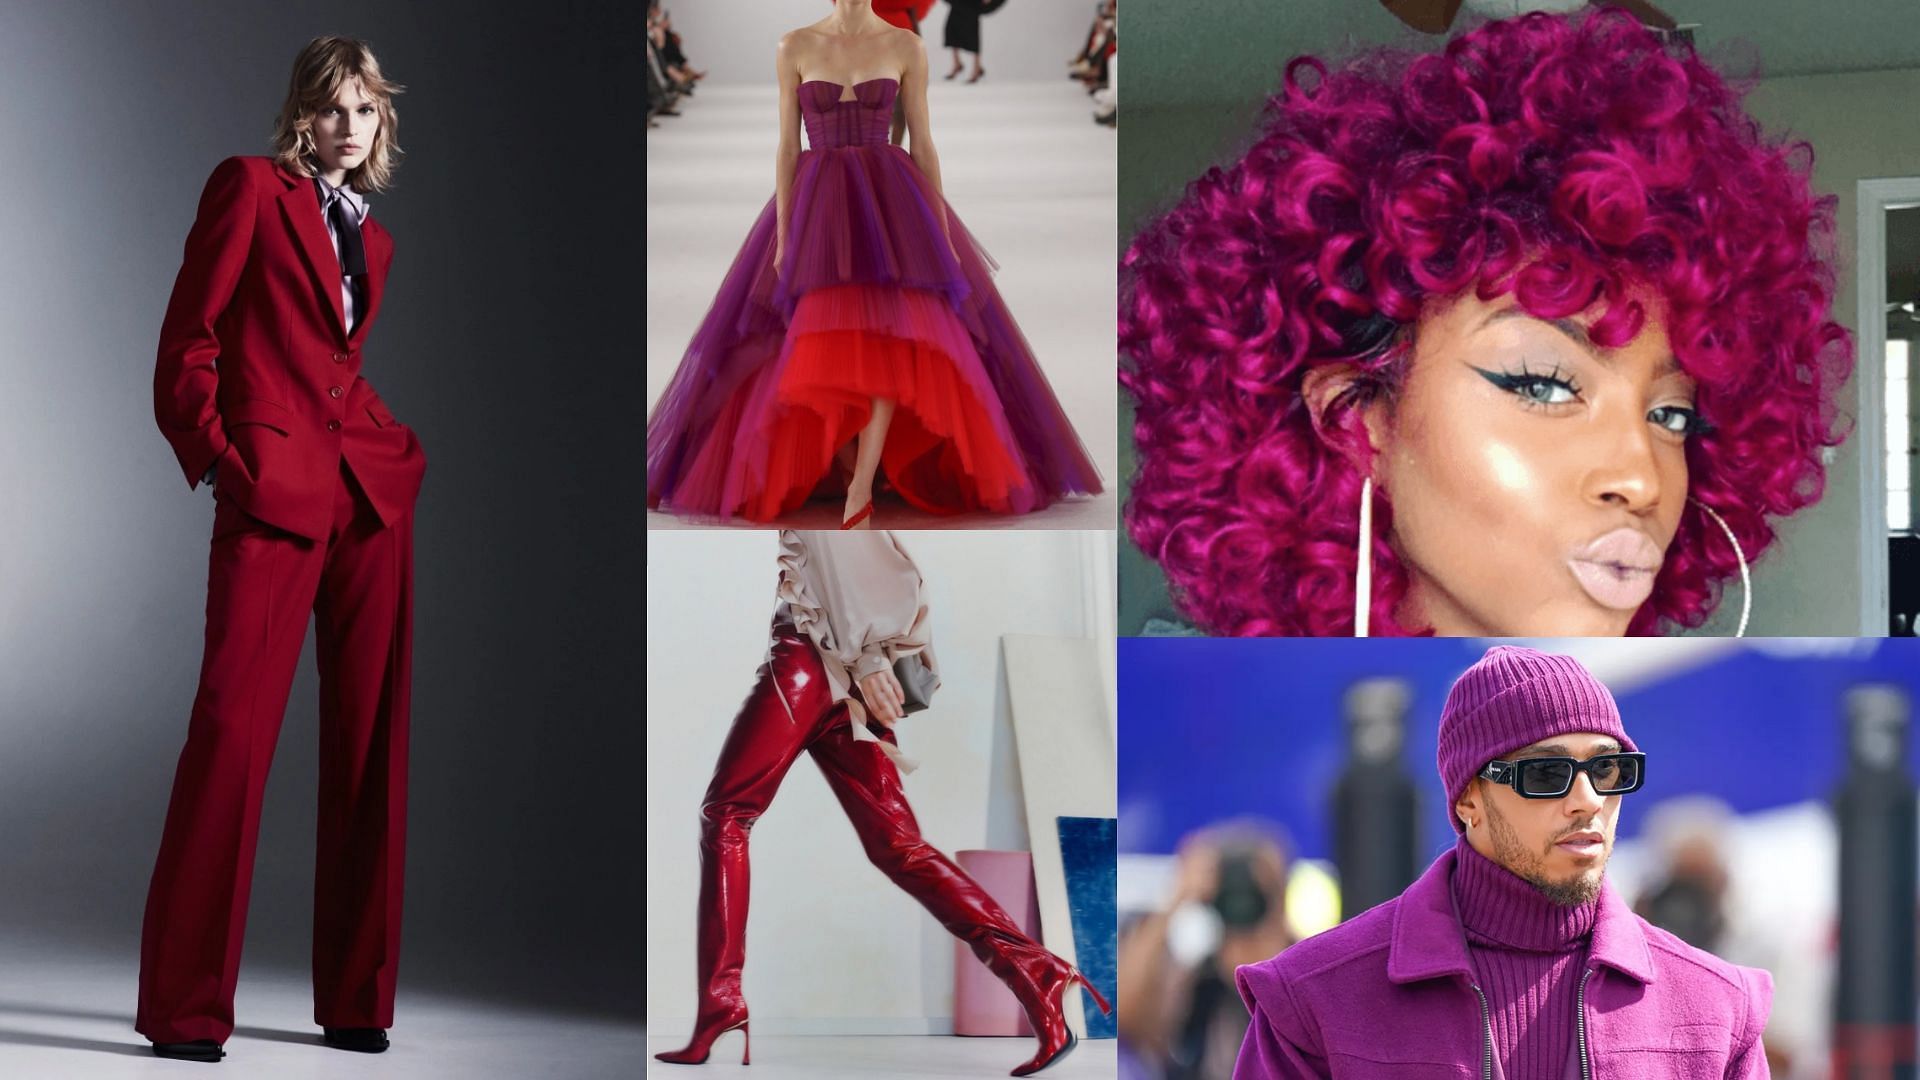 Viva Magenta as seen in fashion and trends (Image via Twitter and The Color Institute)